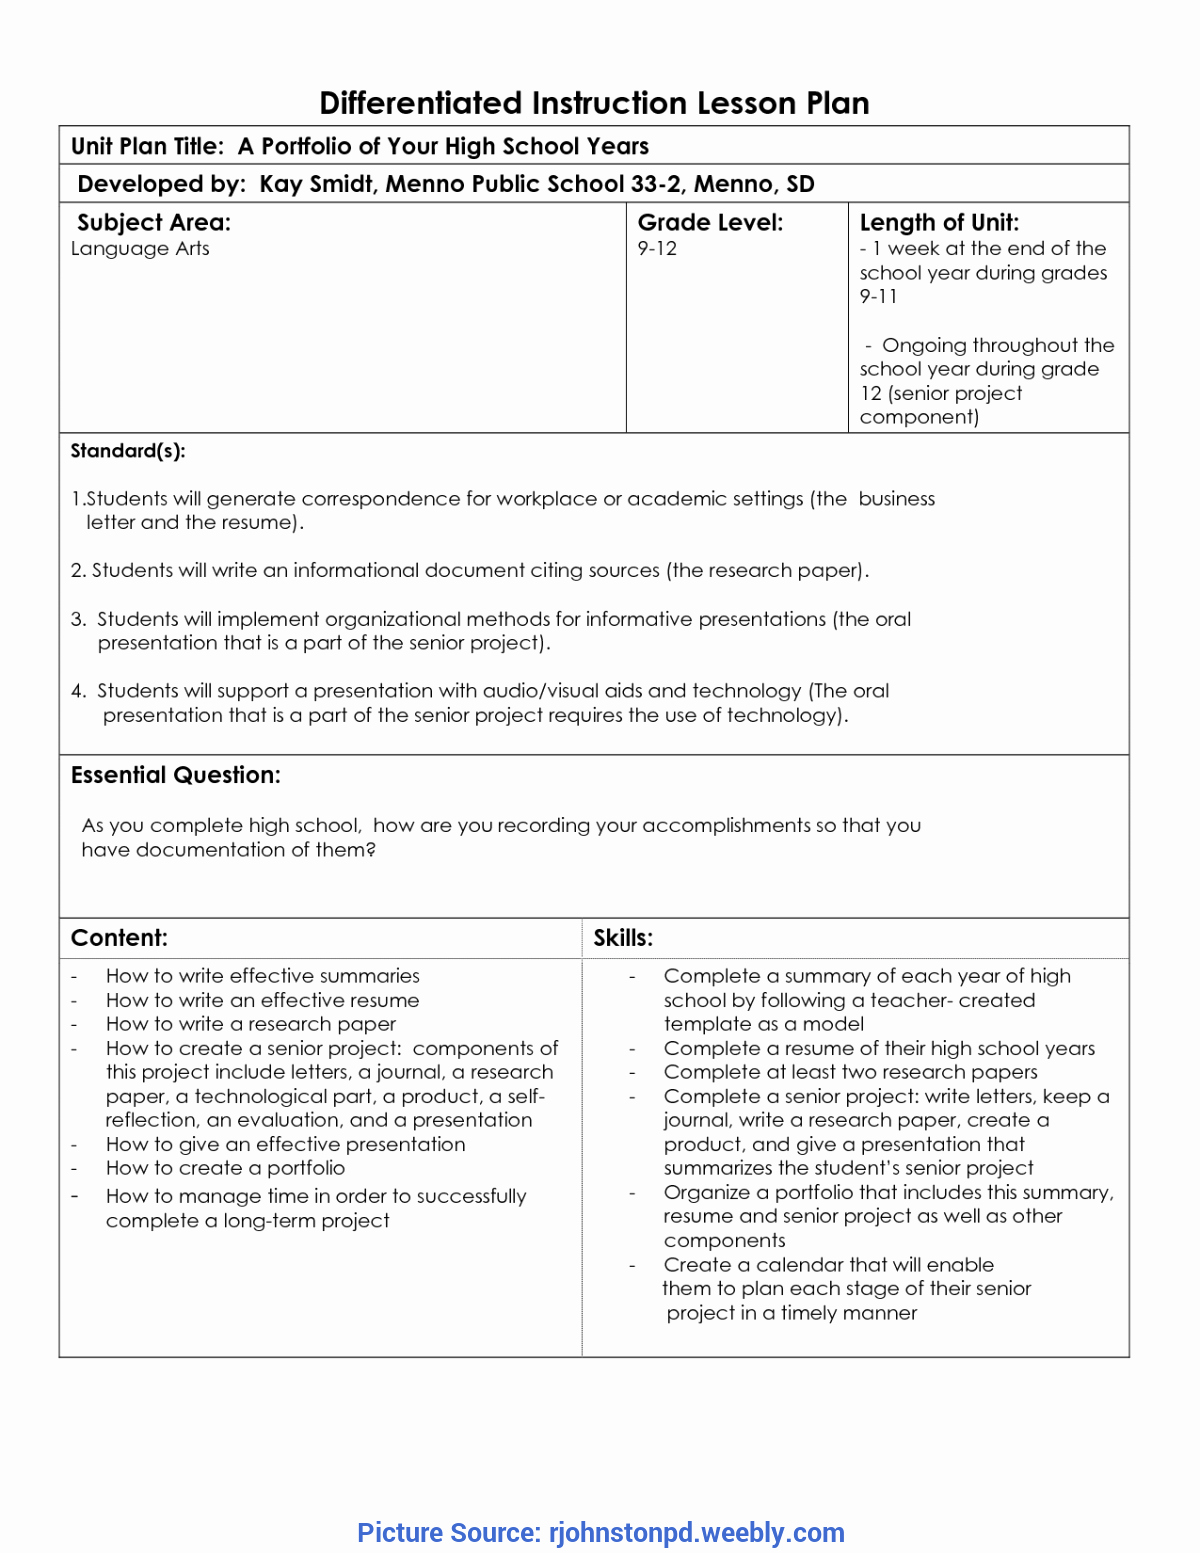 Tiered Lesson Plan Template Inspirational Simple Lesson Plan Summary Example 1